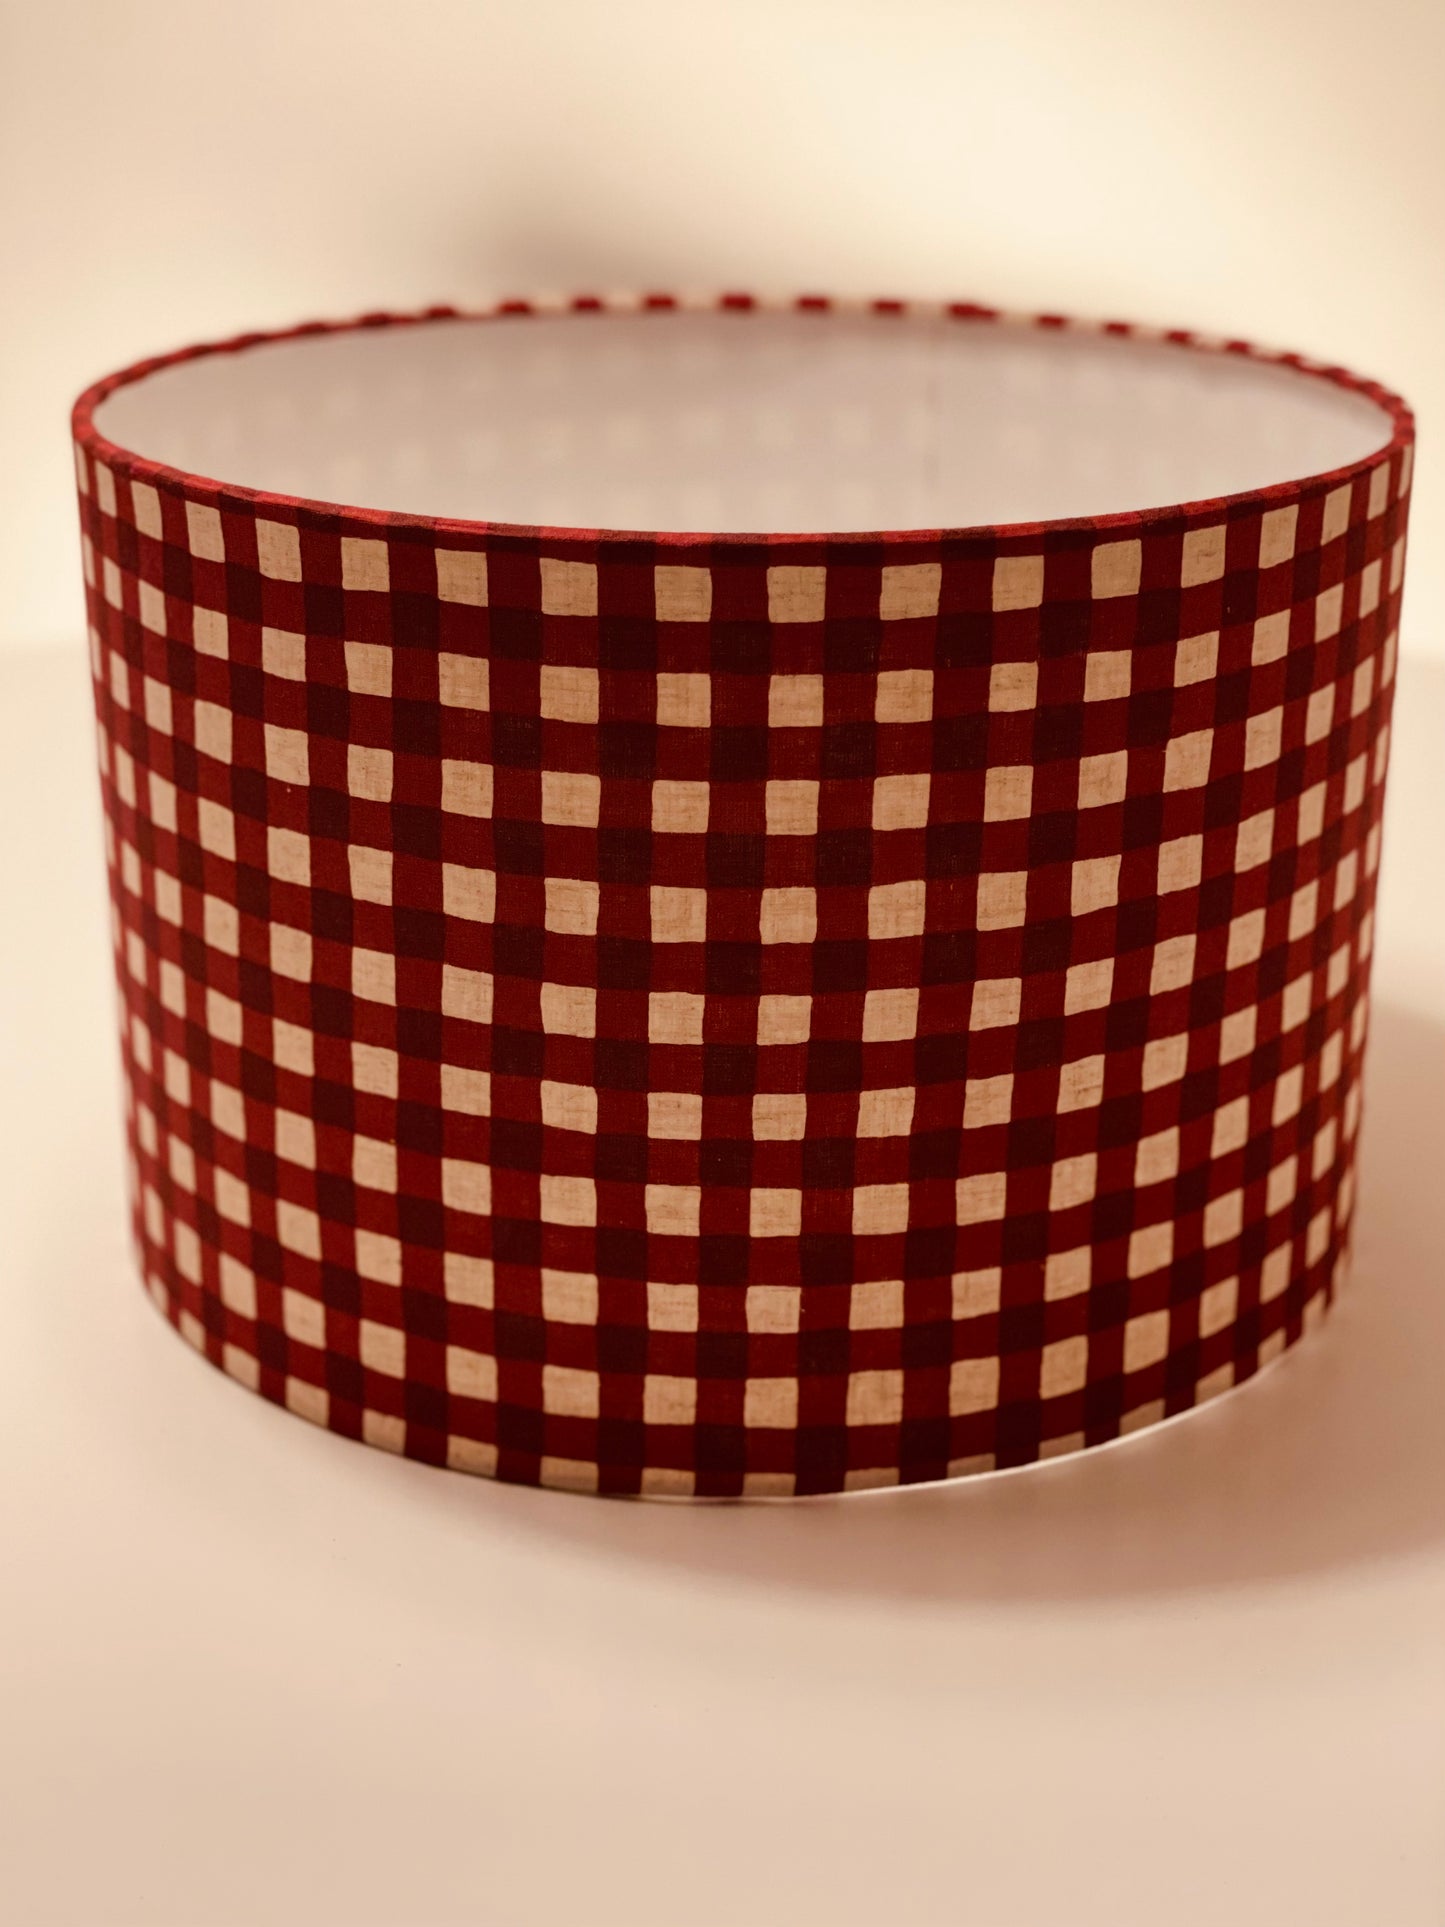 12 Inch Drum Shade. Maroon-Red Gingham Cotton-Linen from Japan.